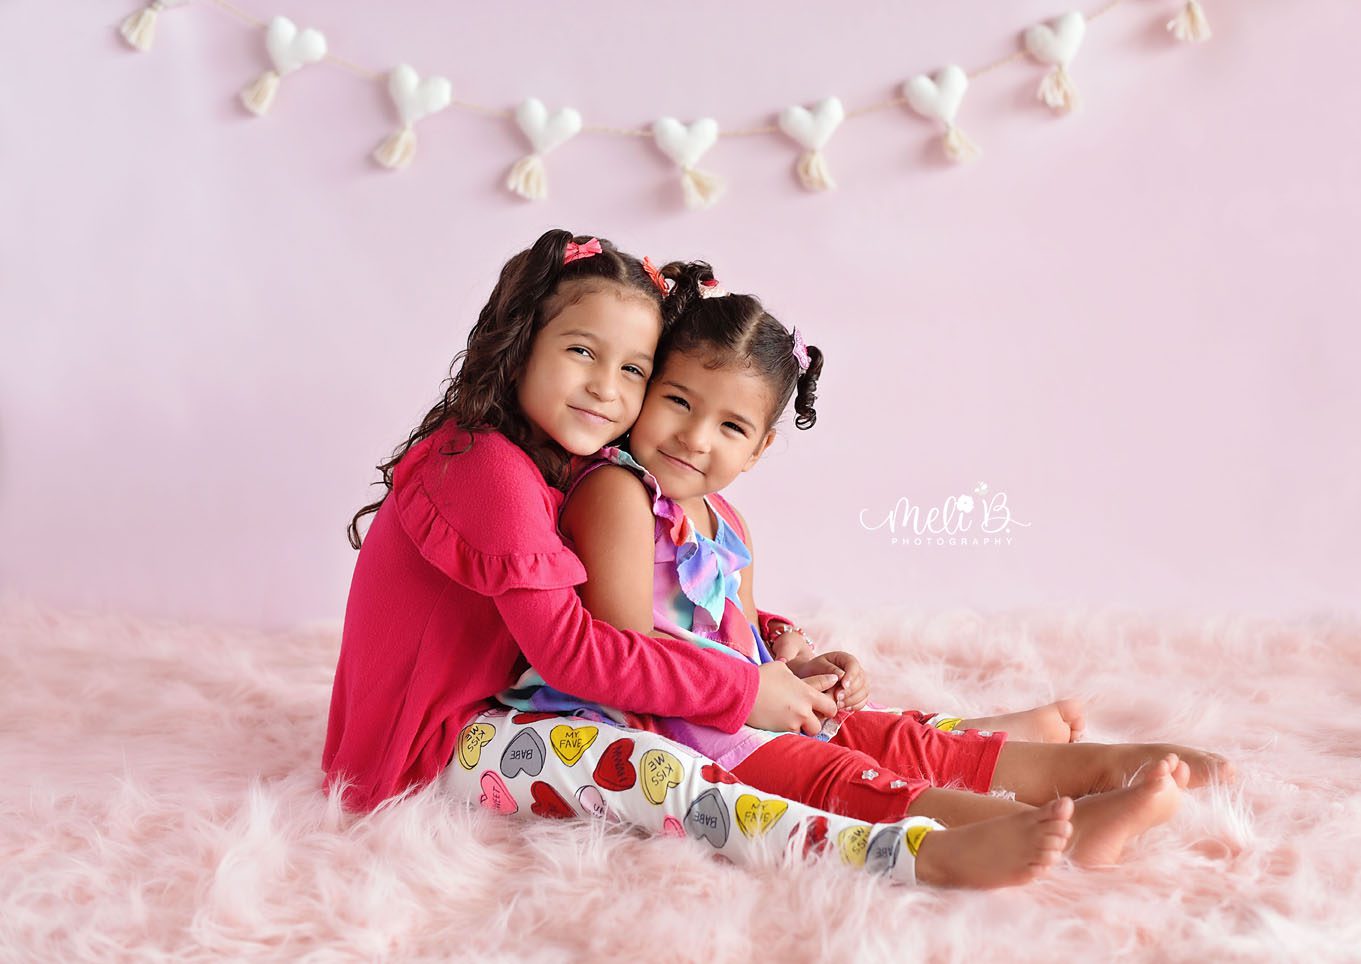 Two sisters in hugging and sitting on a pink rug